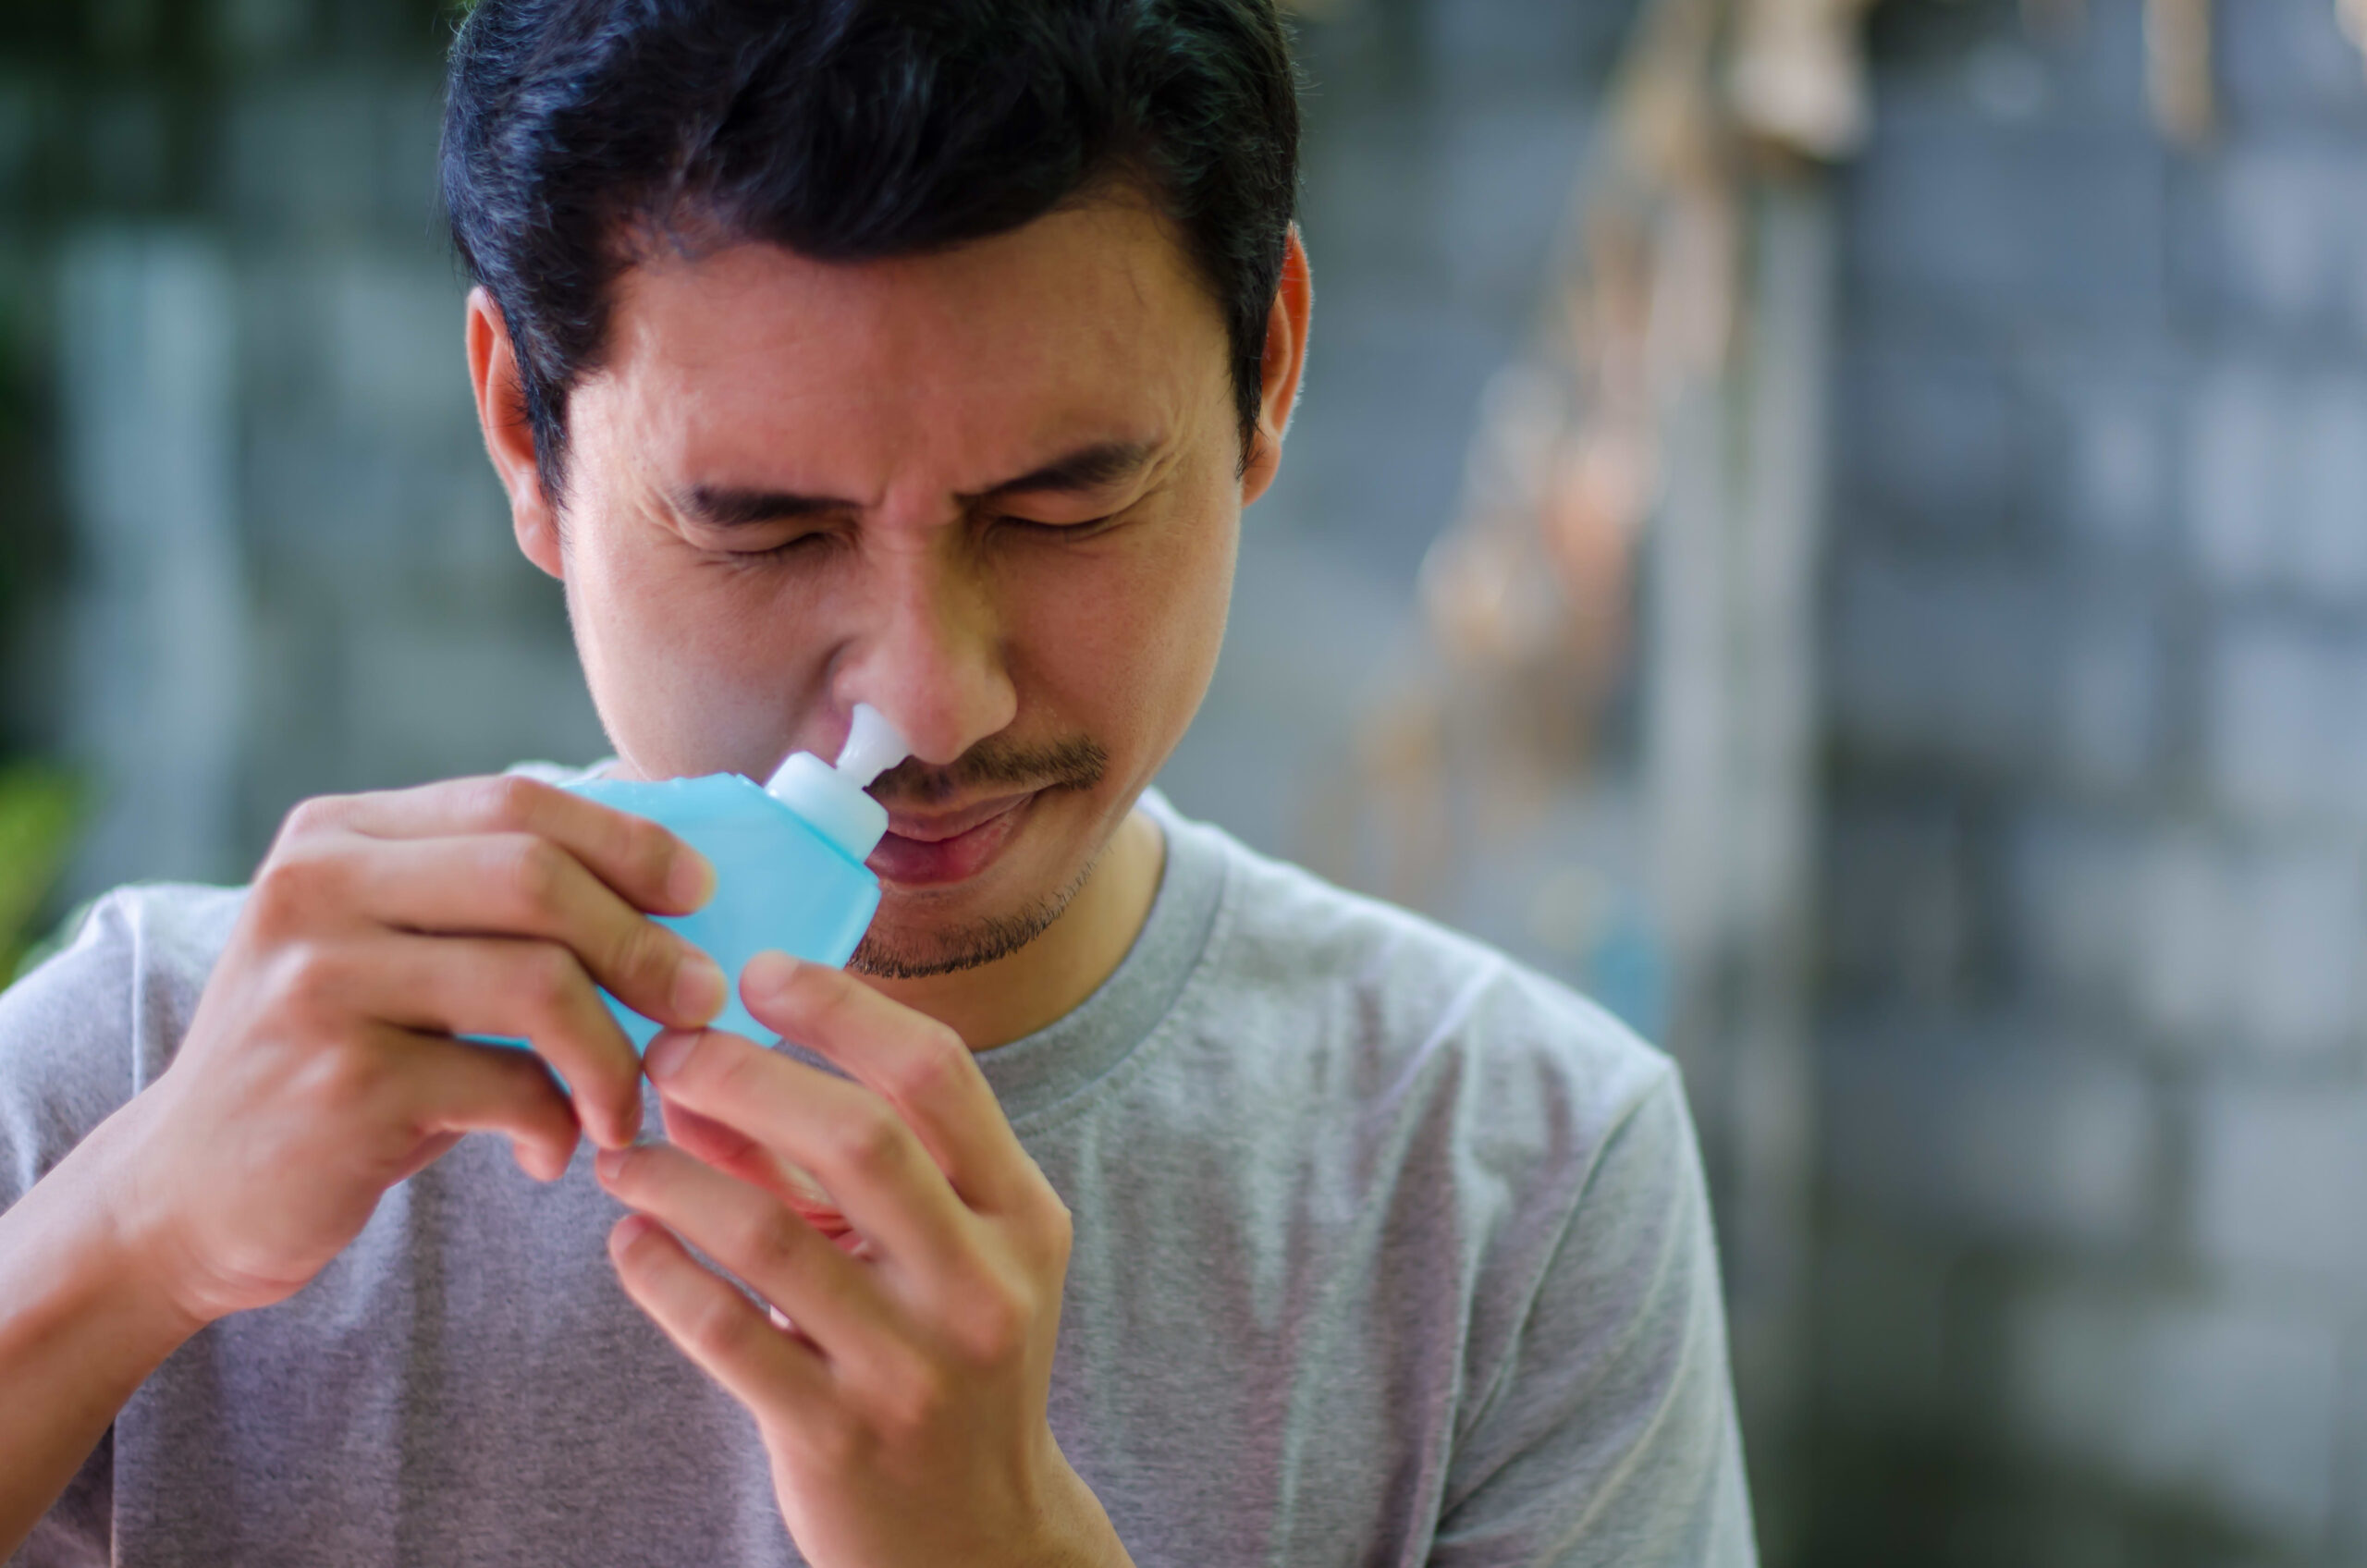 The No. 1 Thing to Know Before Using a Neti Pot—and More Safety Tips, From an Allergist